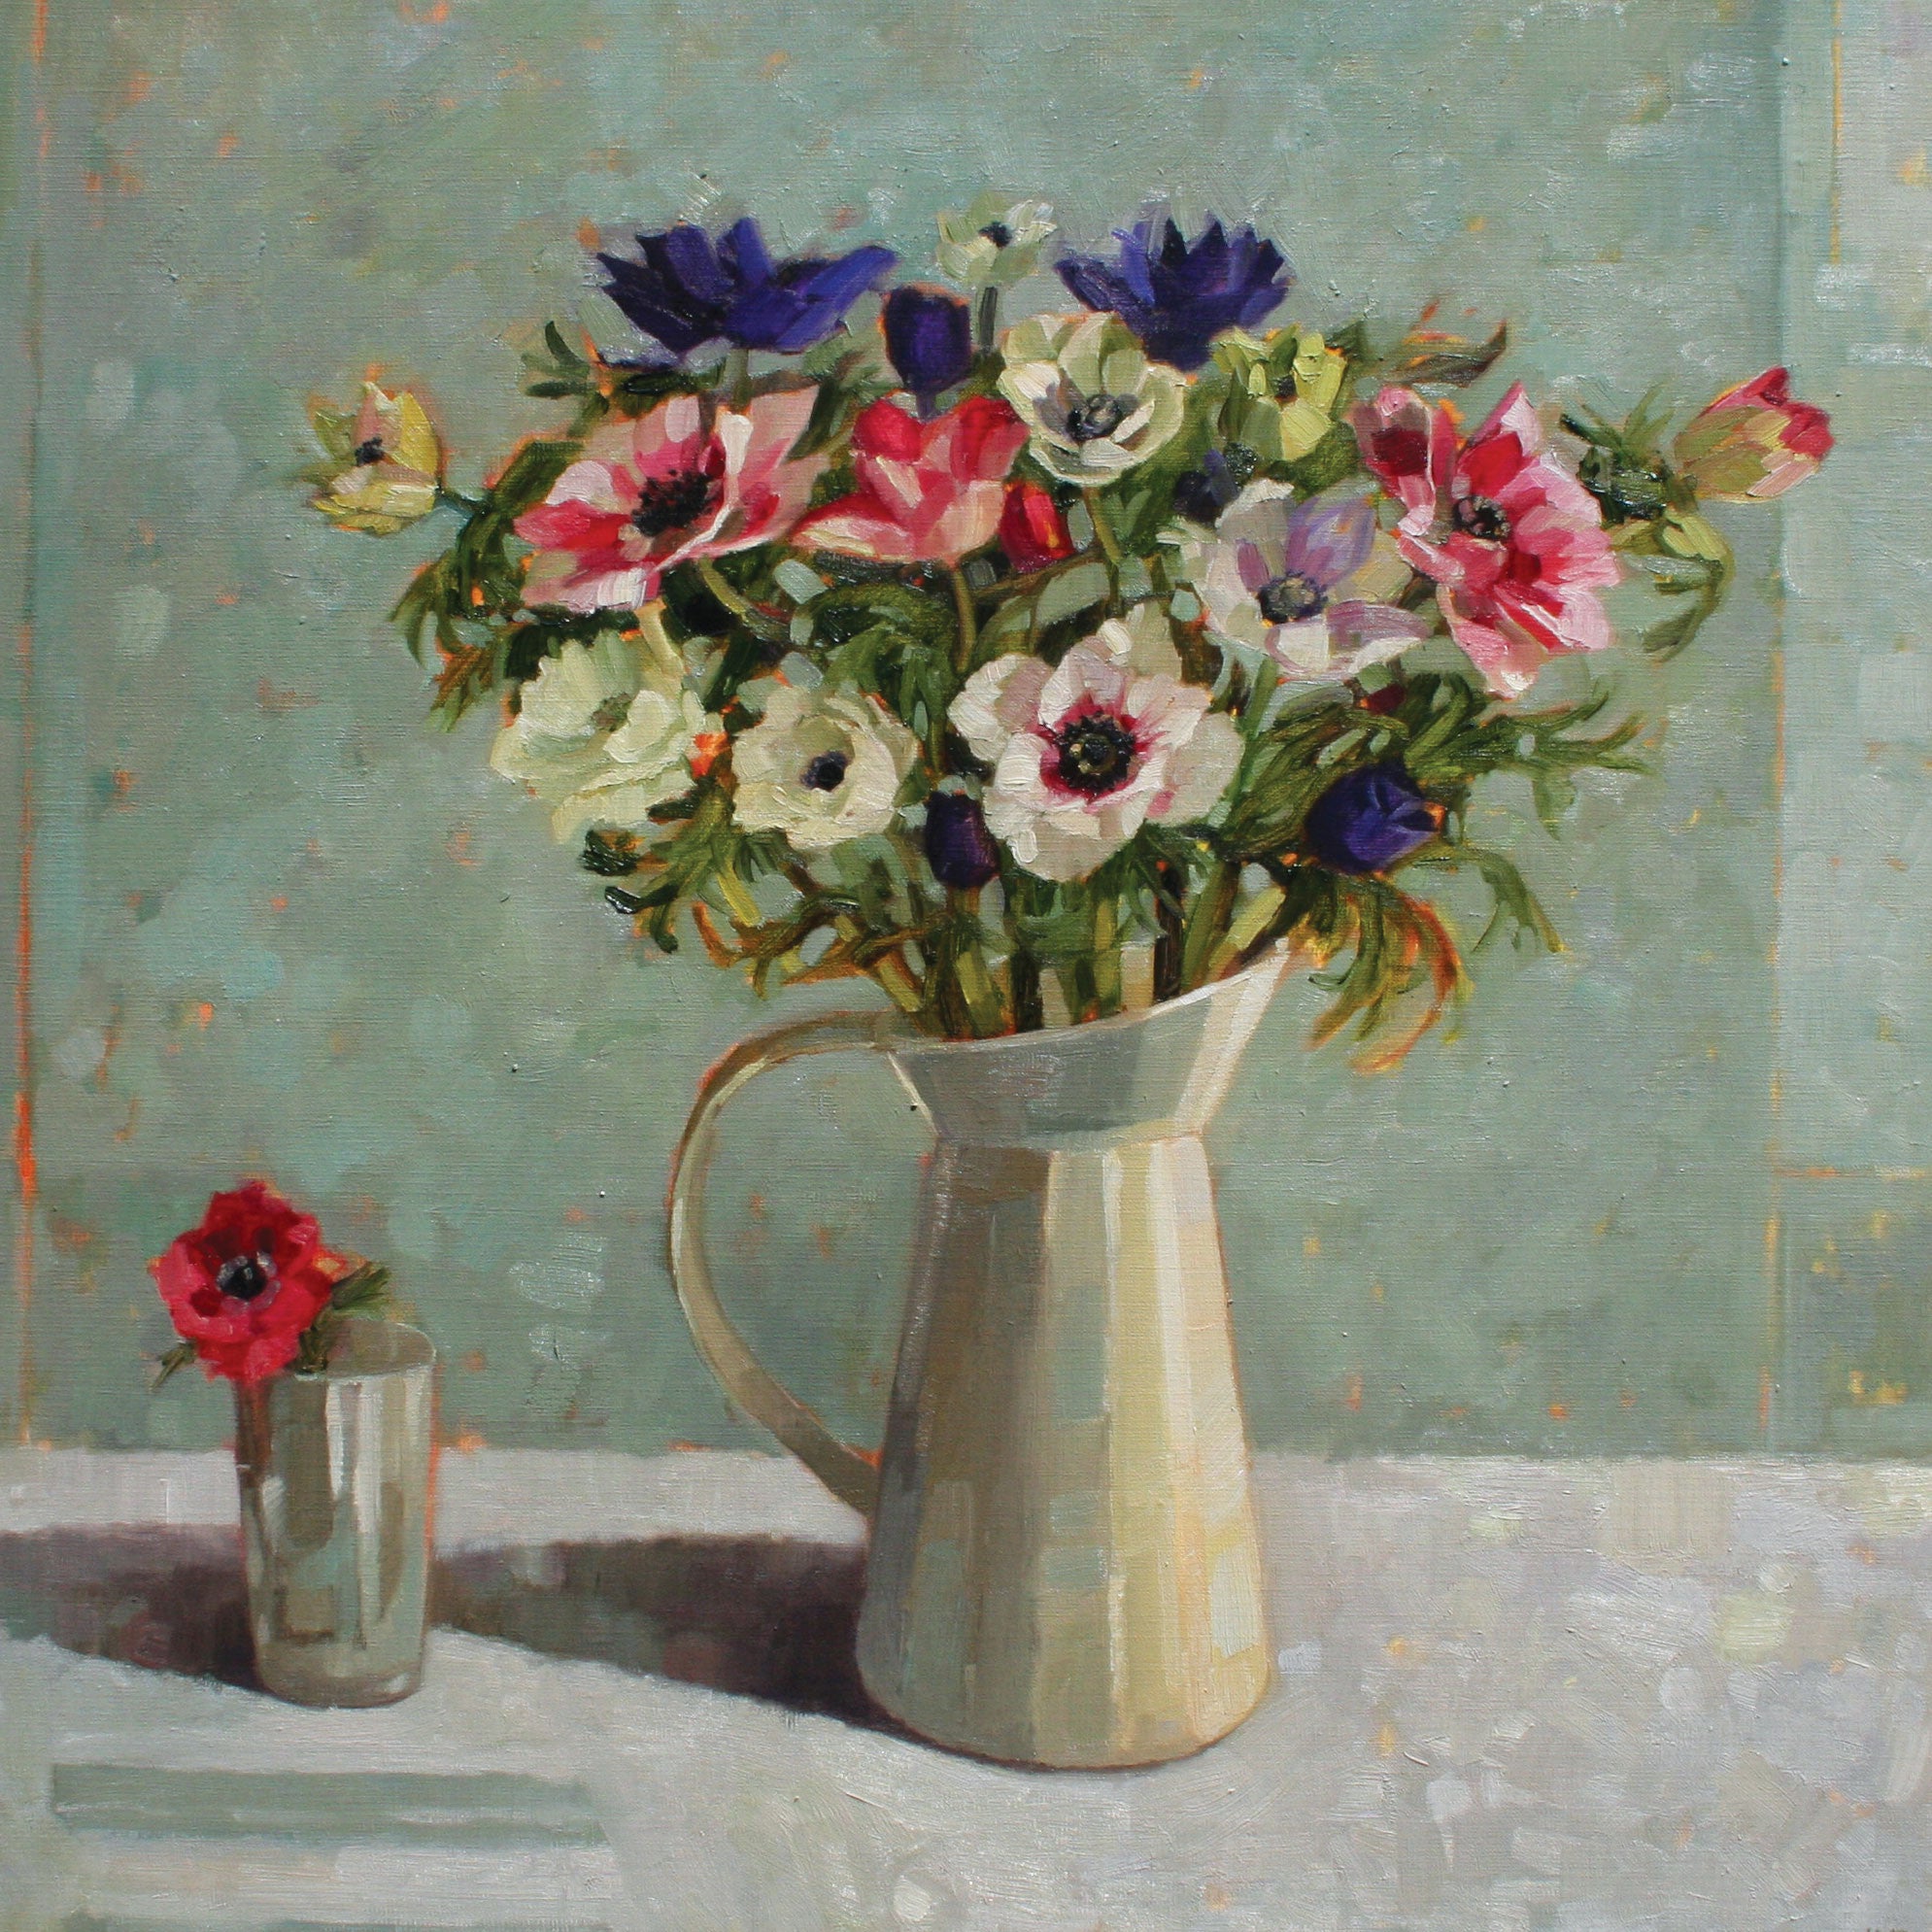 Anemones in a Cream Jug by Anne-Marie Butlin, Fine Art Greeting Card, Oil on Canvas, Anemones in cream jug